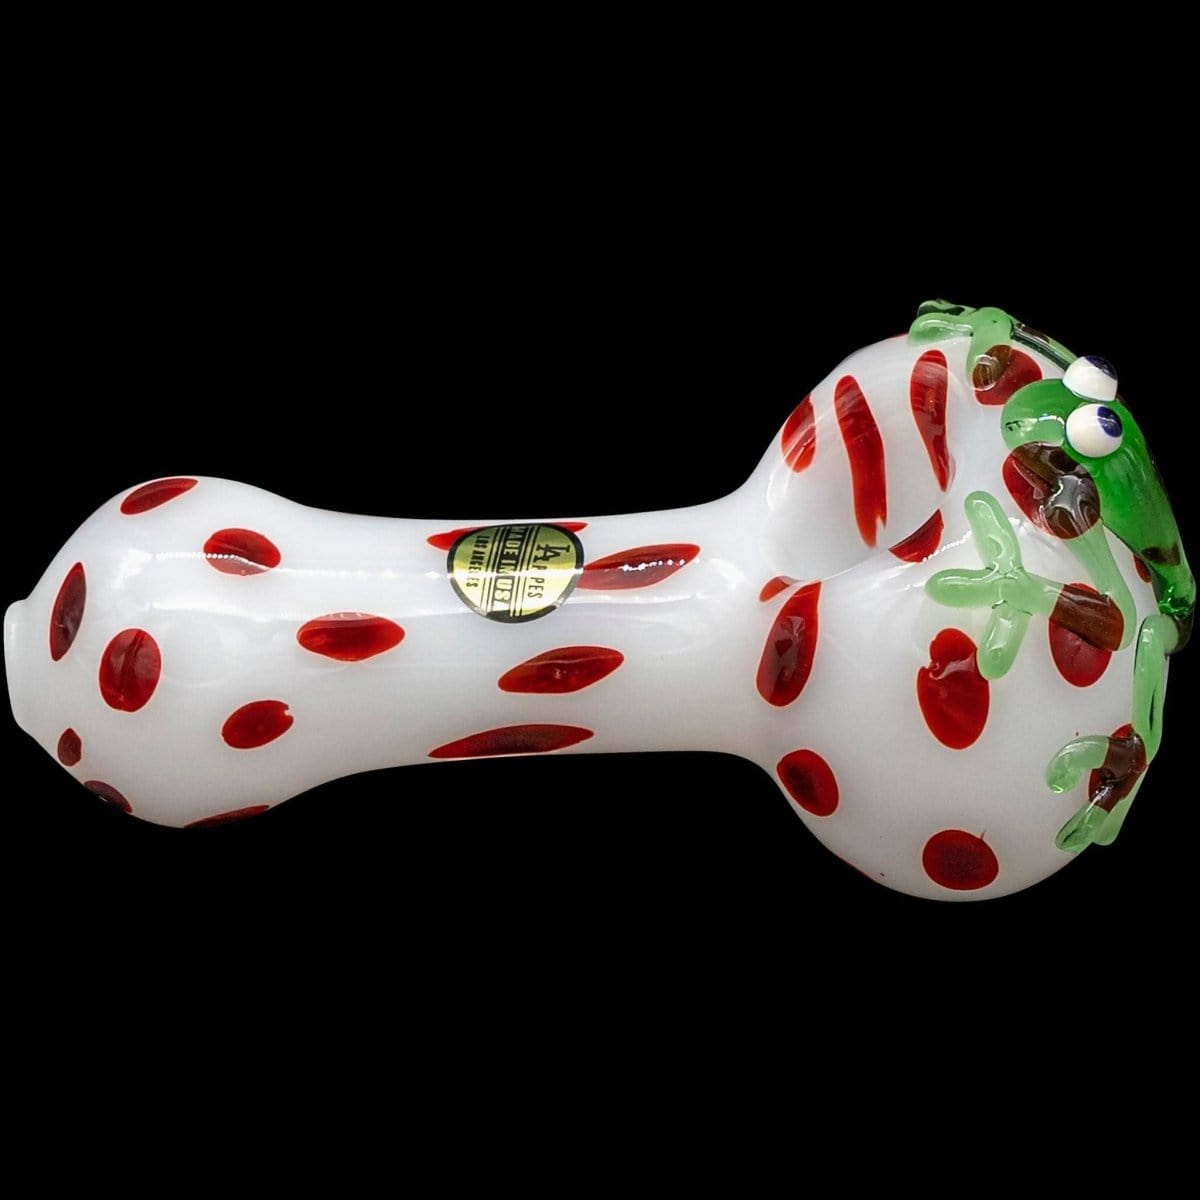 LA Pipes Hand Pipe "Spotted Poison Frog" Spoon Glass Pipe